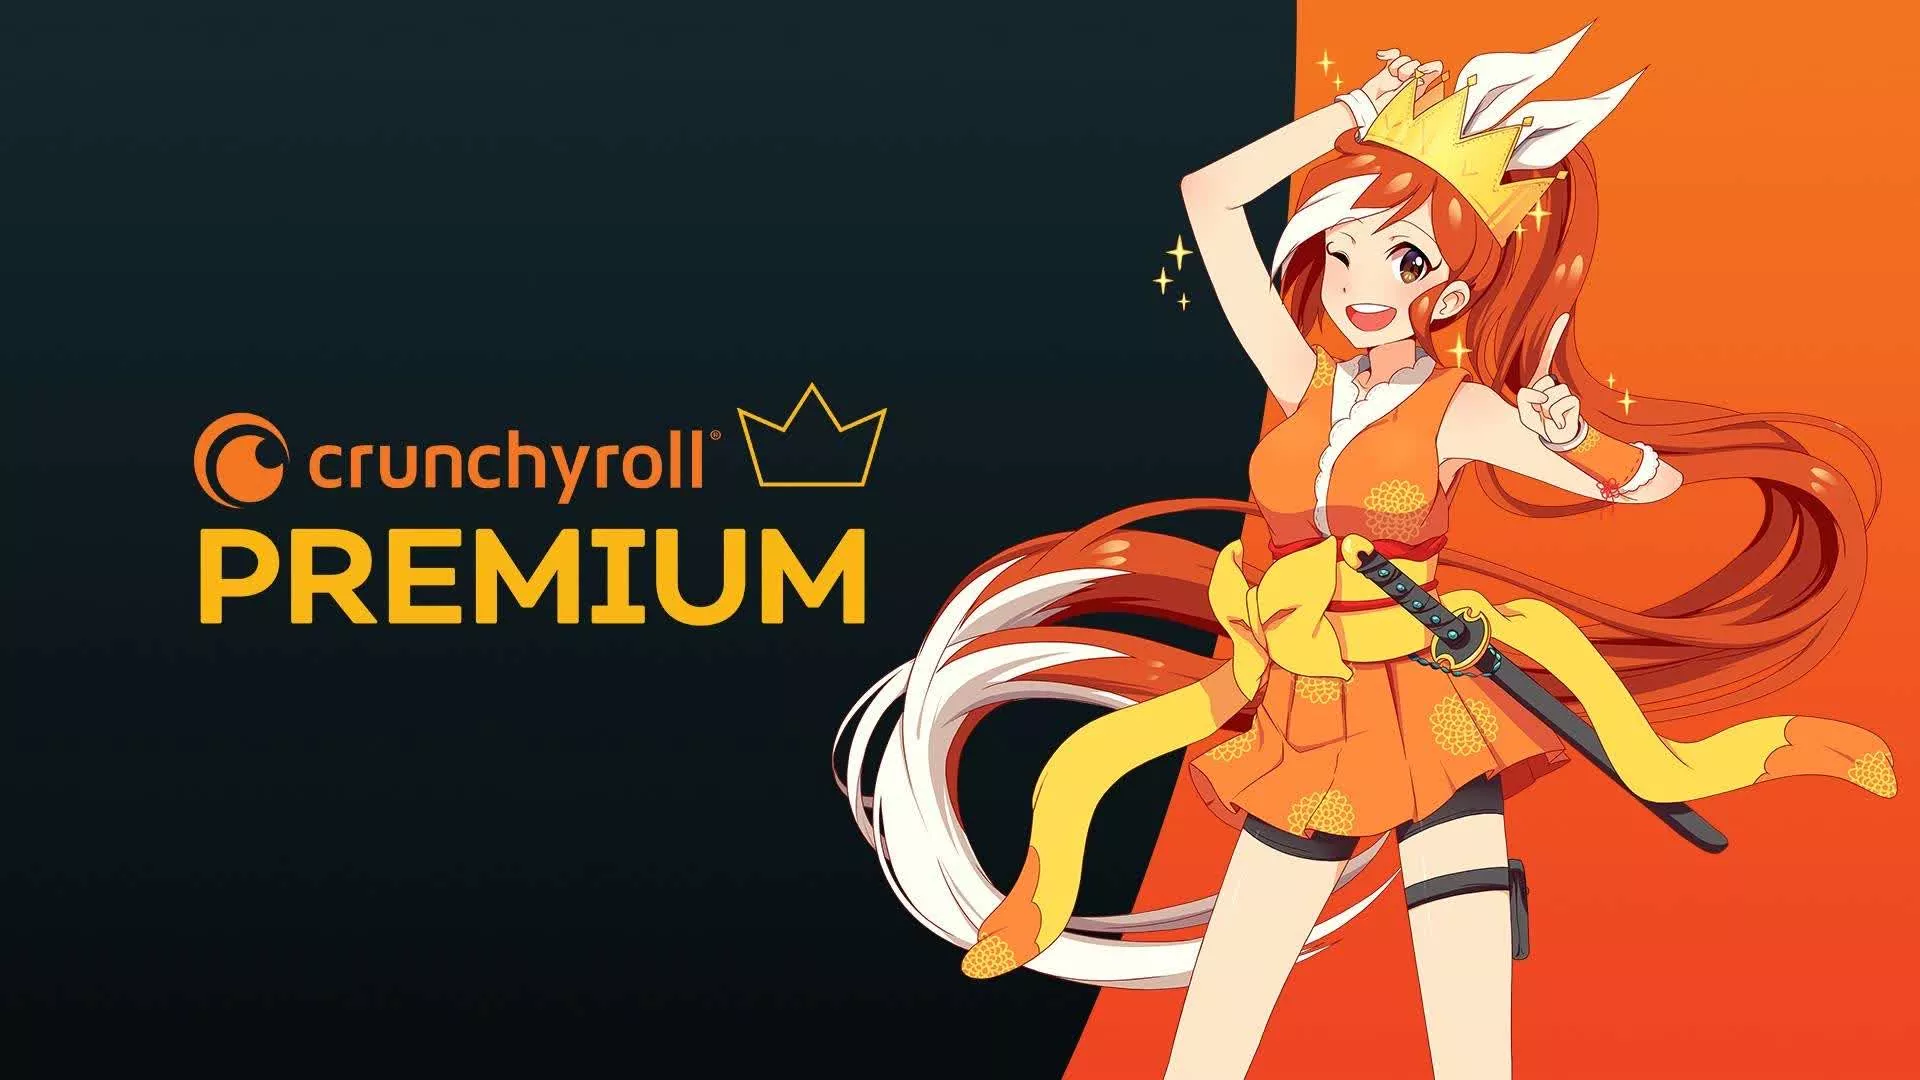 Xbox is giving away 75 days of Crunchyroll Premium to Game Pass Ultimate subscribers | TechSpot